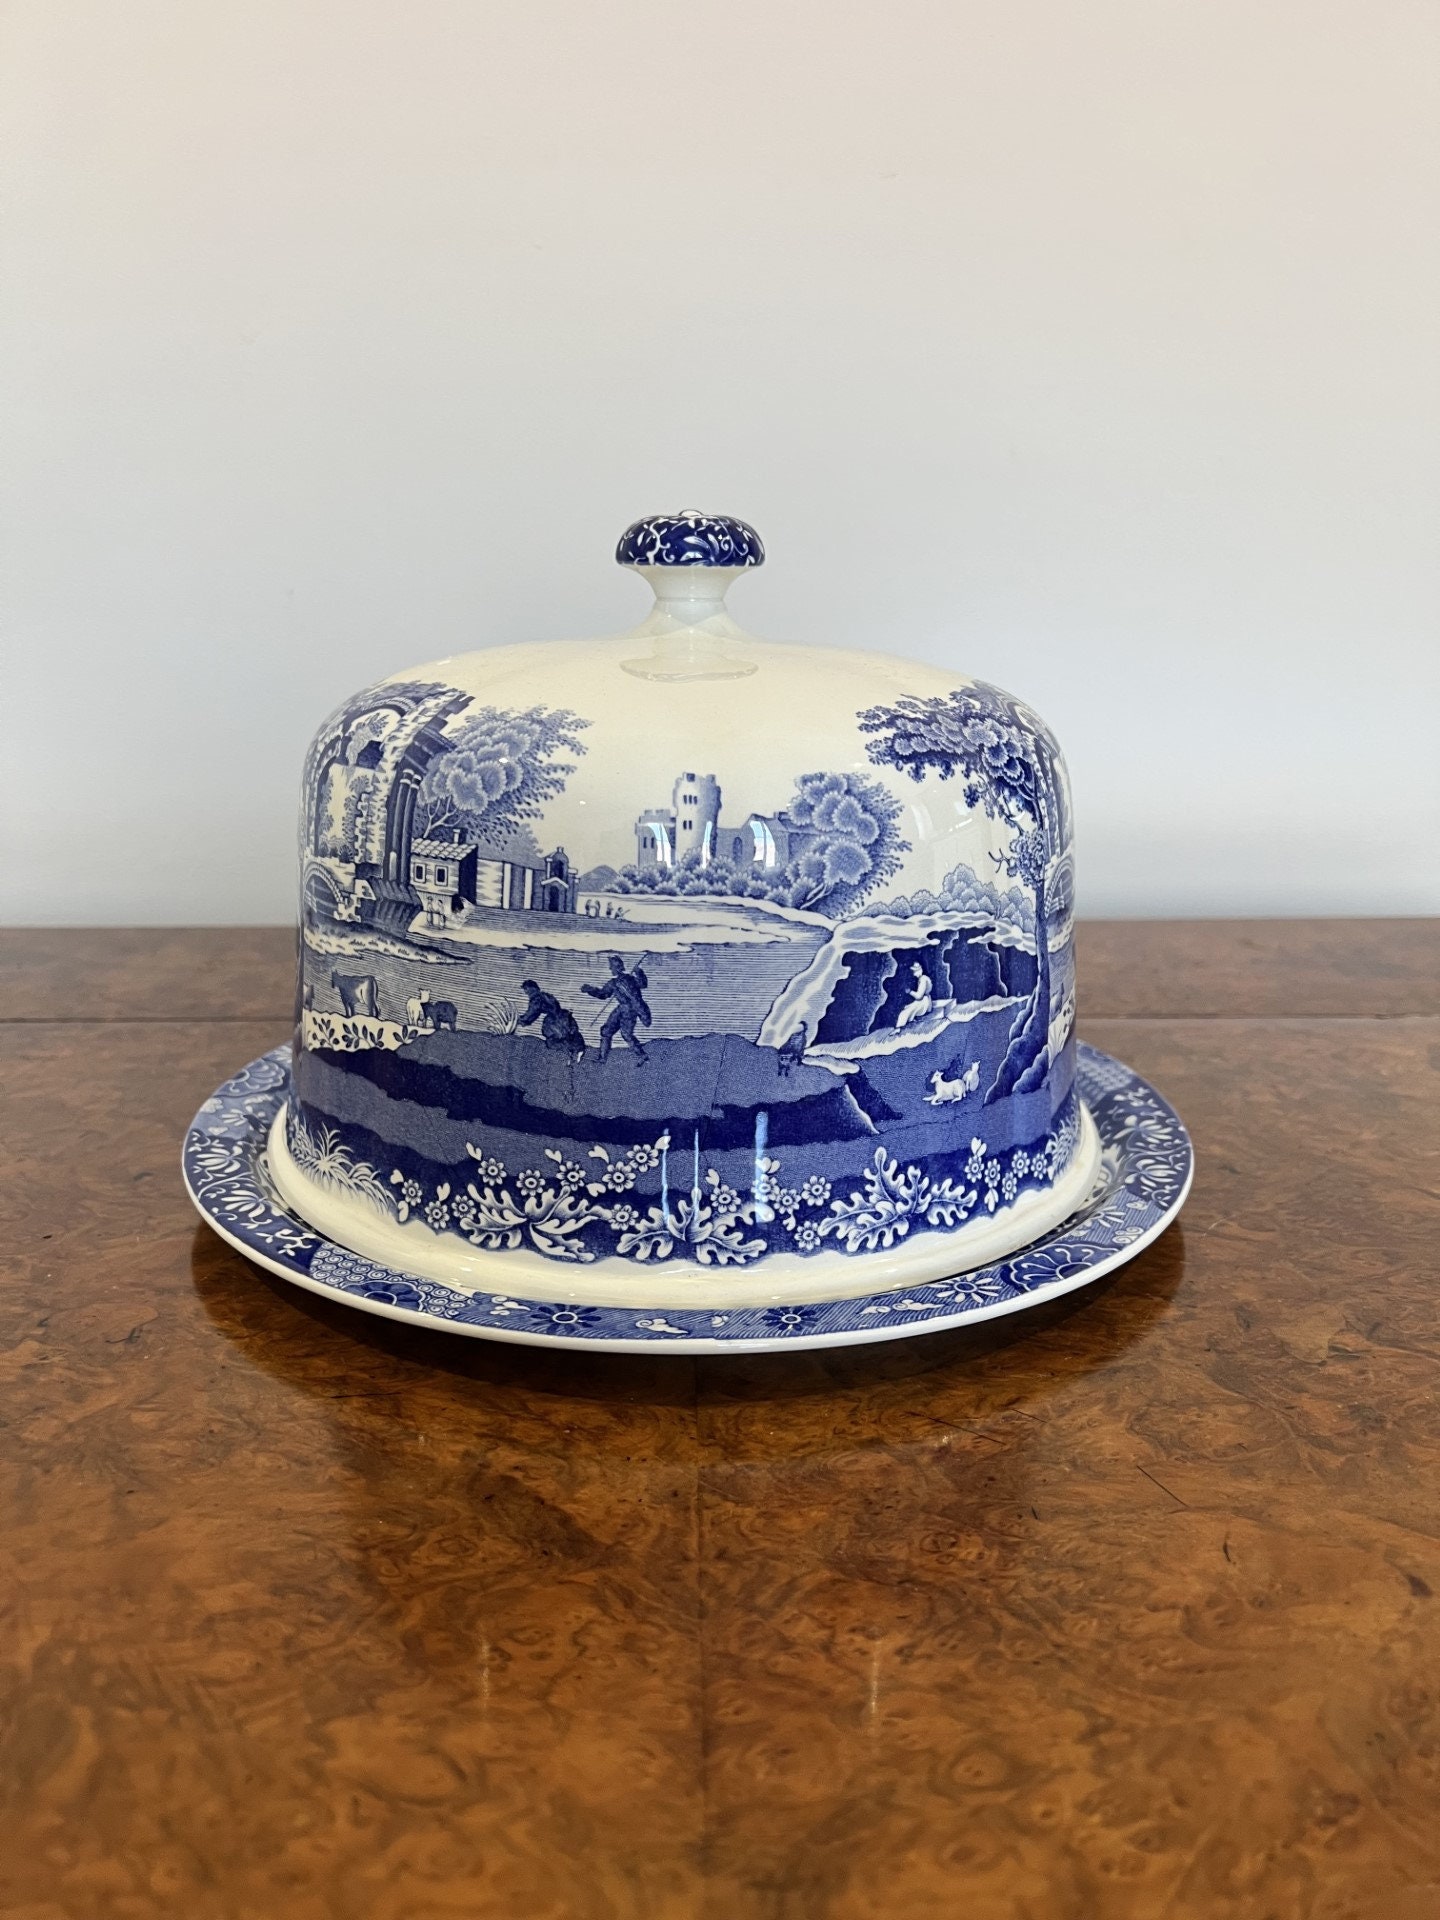 Large Vintage Cheese Keeper, English, Ceramic, Decorative, Kitchen, Dome,  C.1950 at 1stDibs